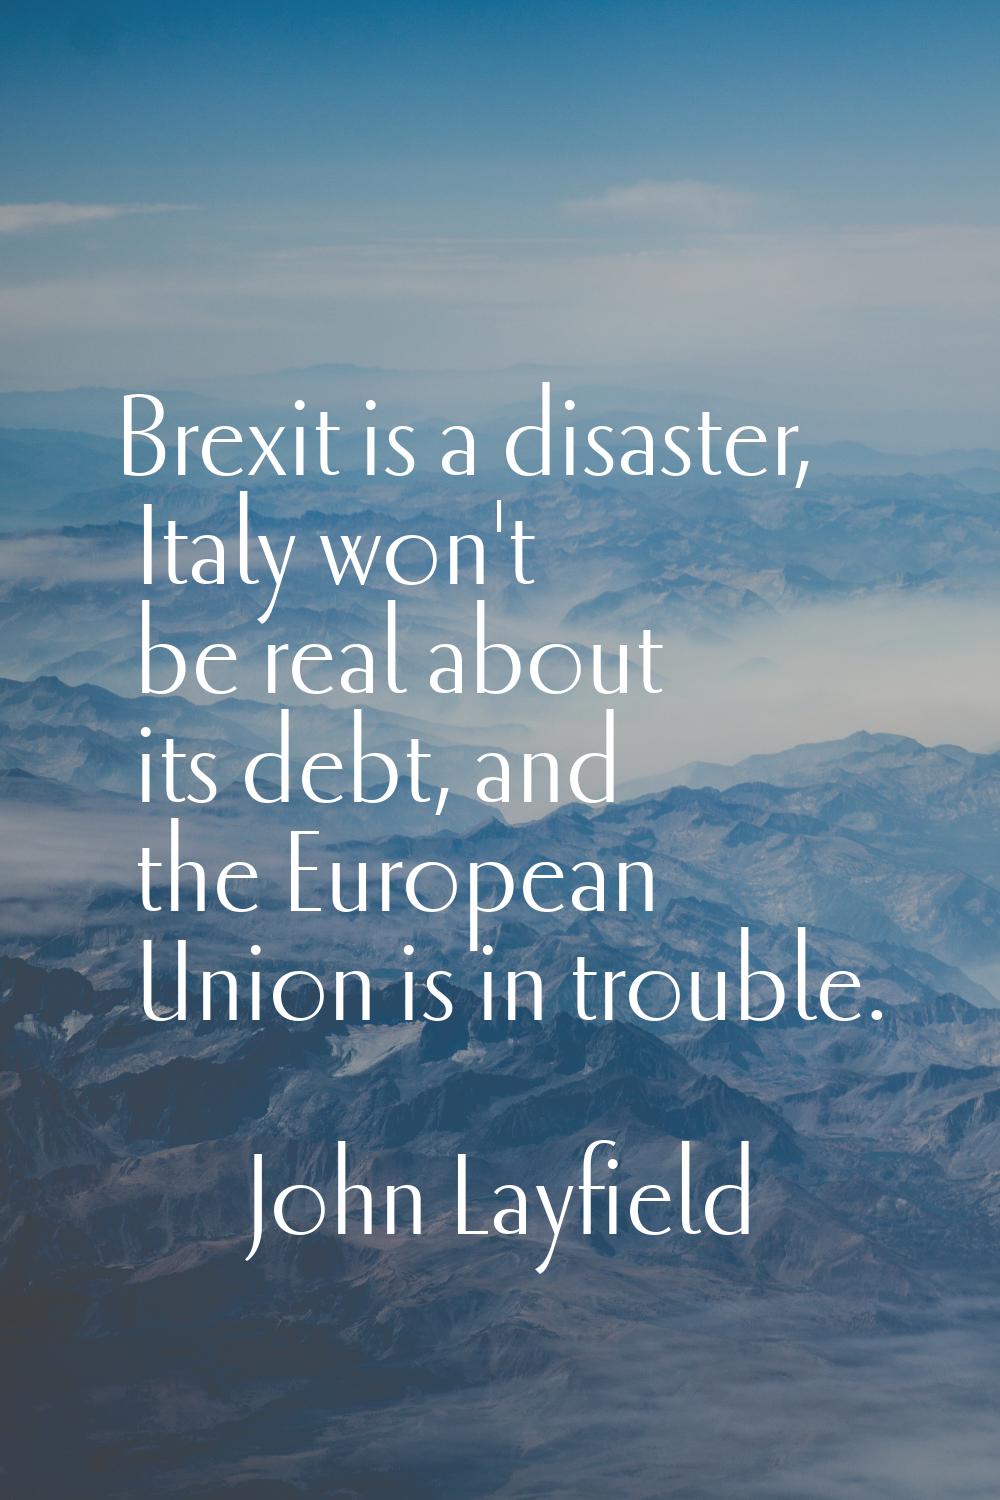 Brexit is a disaster, Italy won't be real about its debt, and the European Union is in trouble.